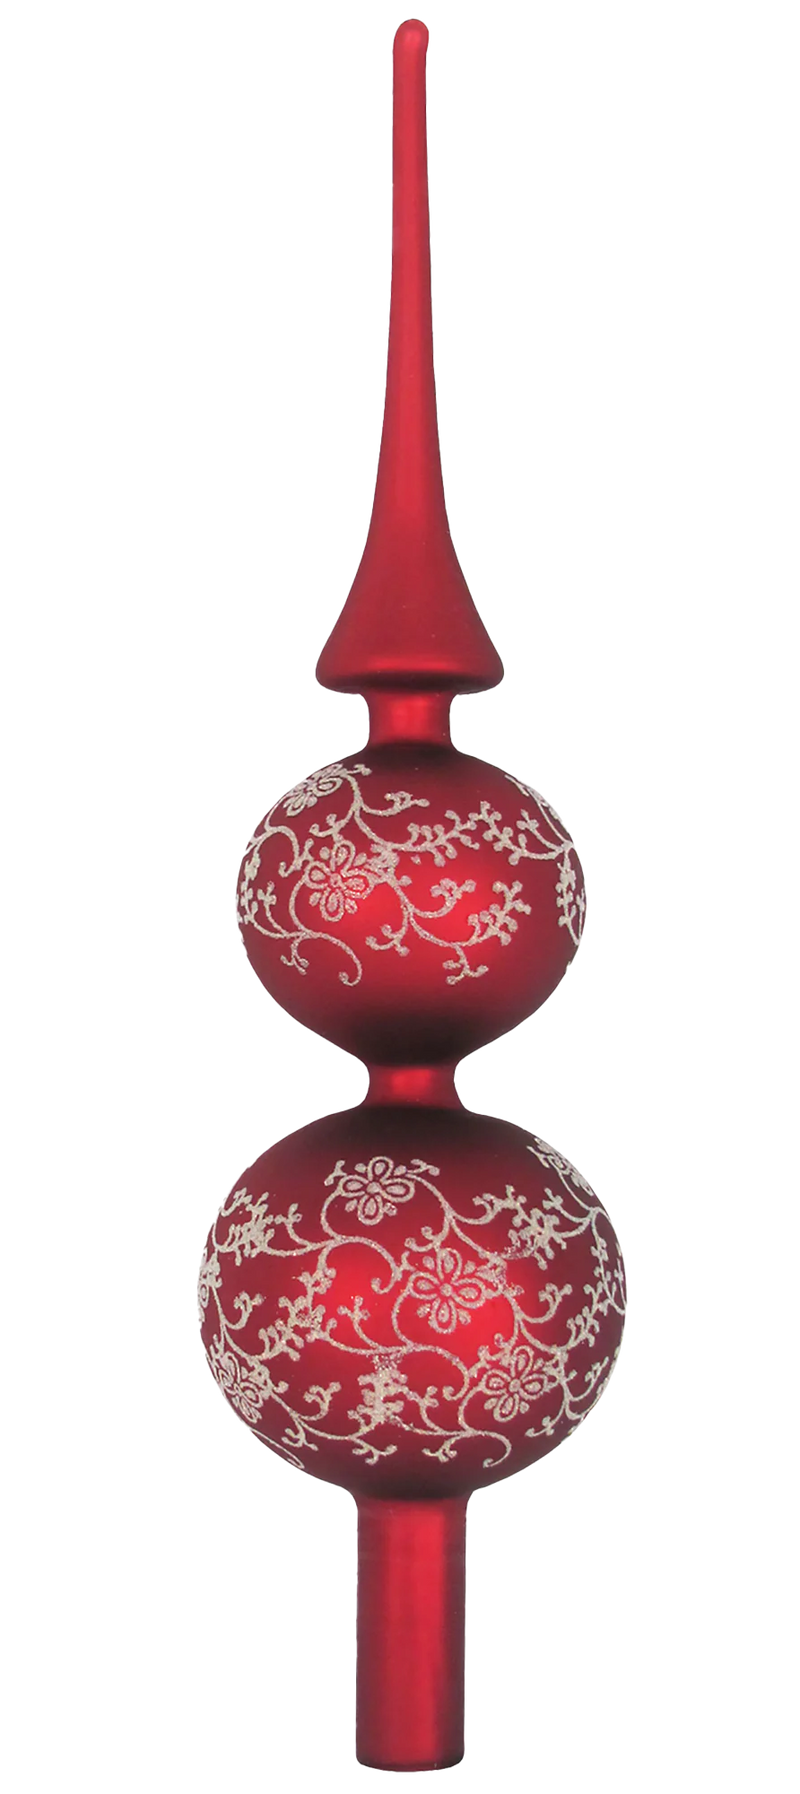 Red 13" Glass Treetopper with Gold Floral Glitterlace - Red Velvet